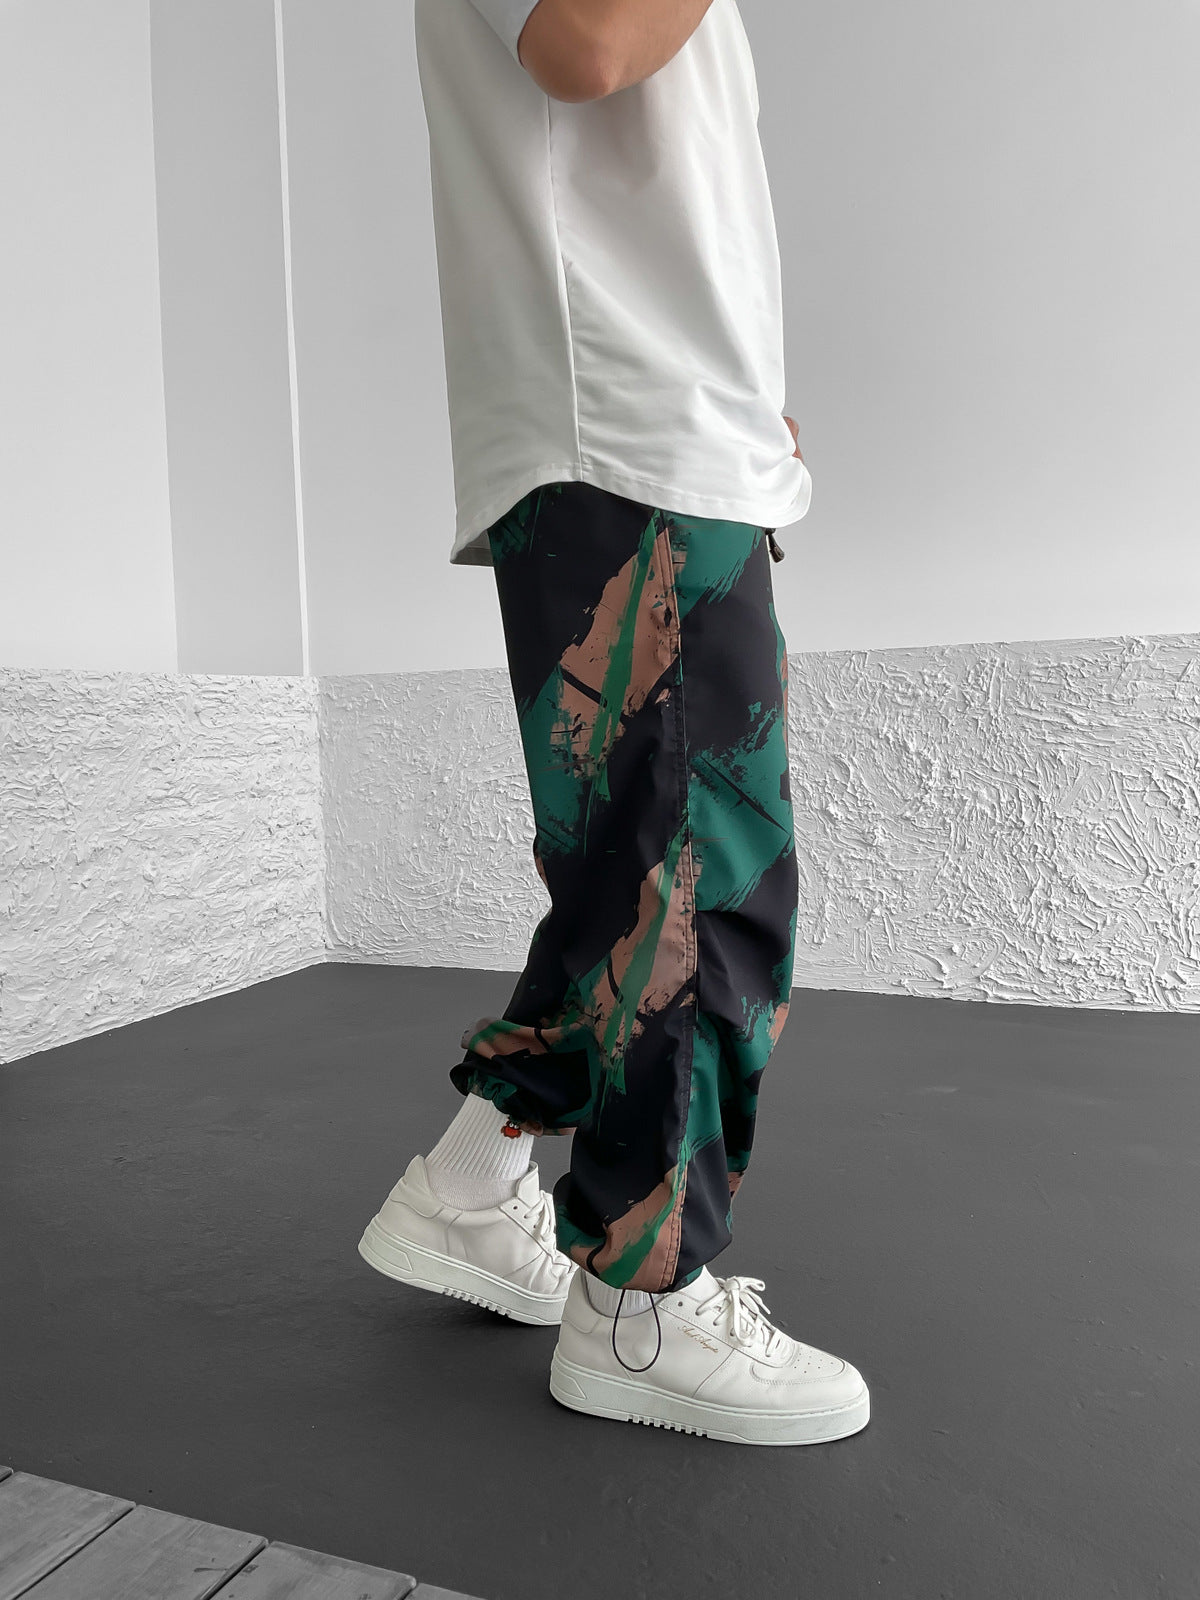 Green Patterned Comfortable Pants